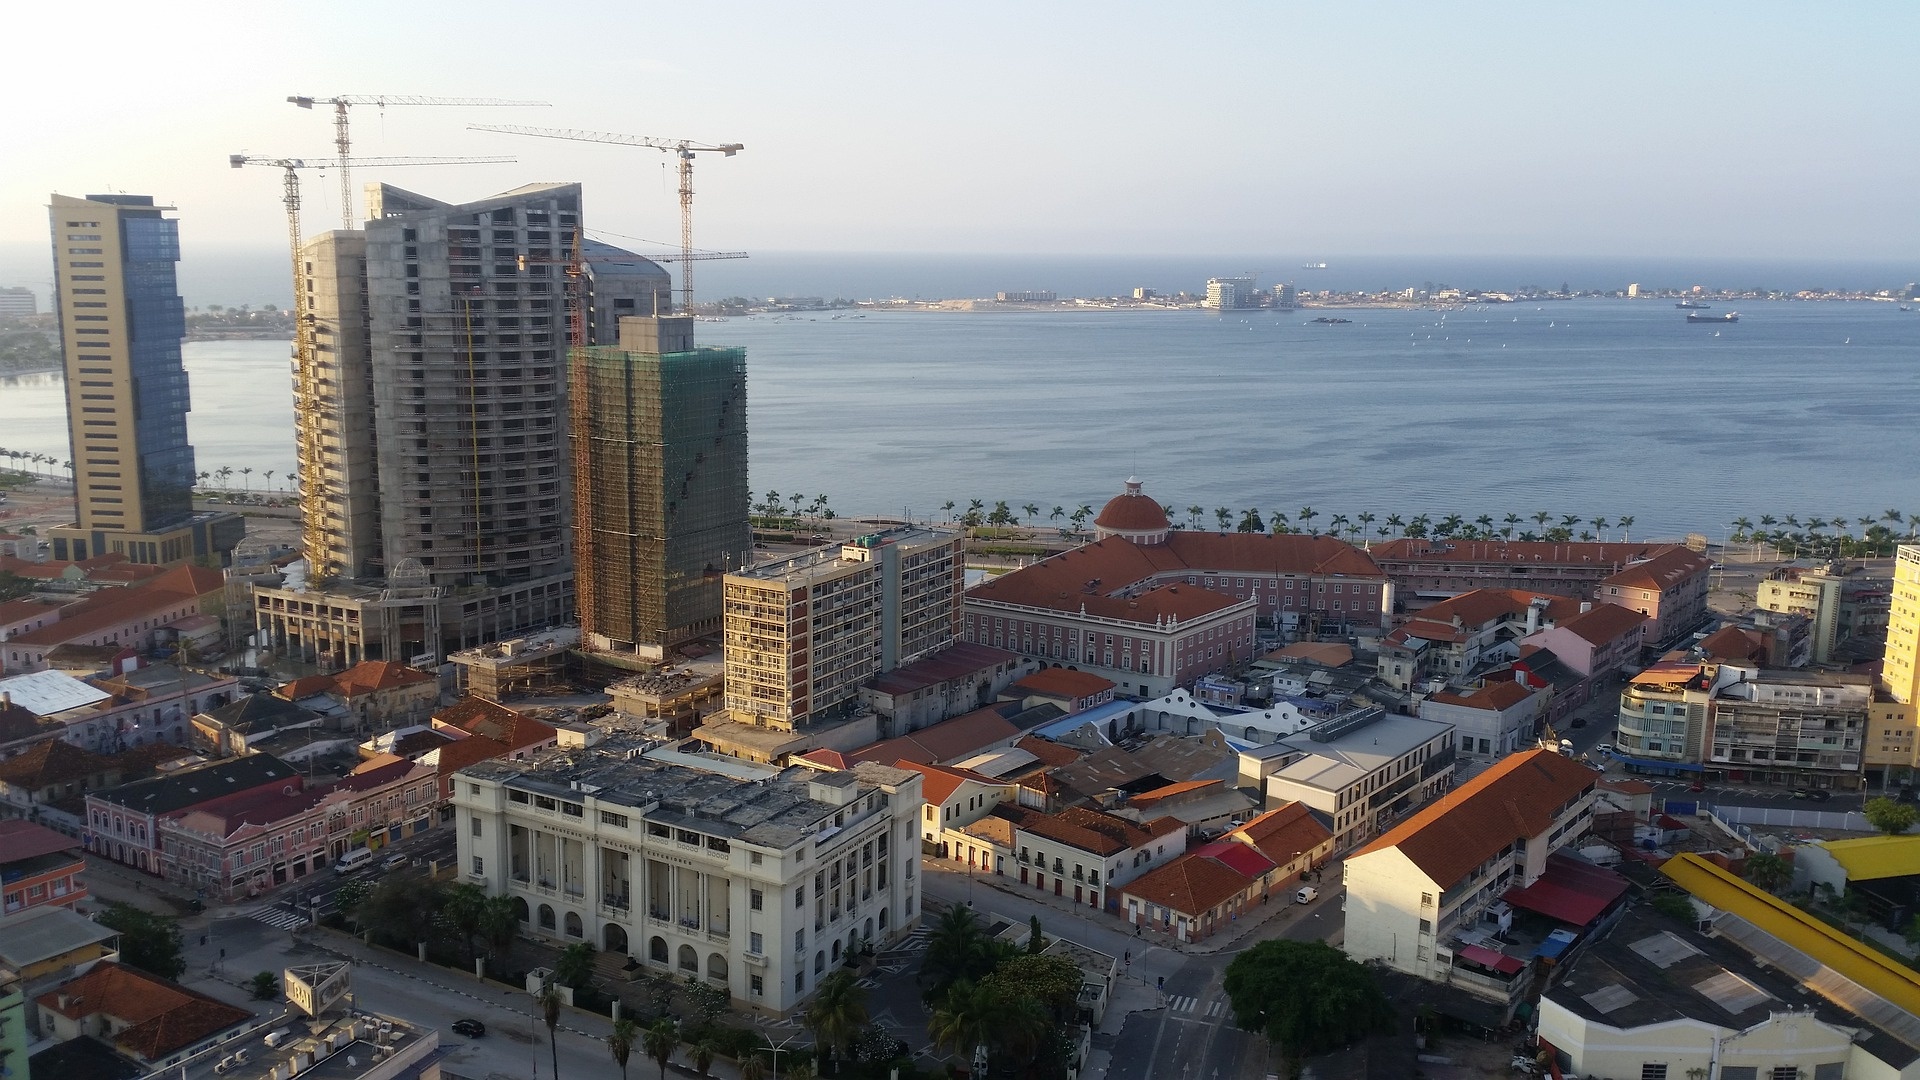 Luanda, Angola travels, African education, Introduction to Africa, 1920x1080 Full HD Desktop